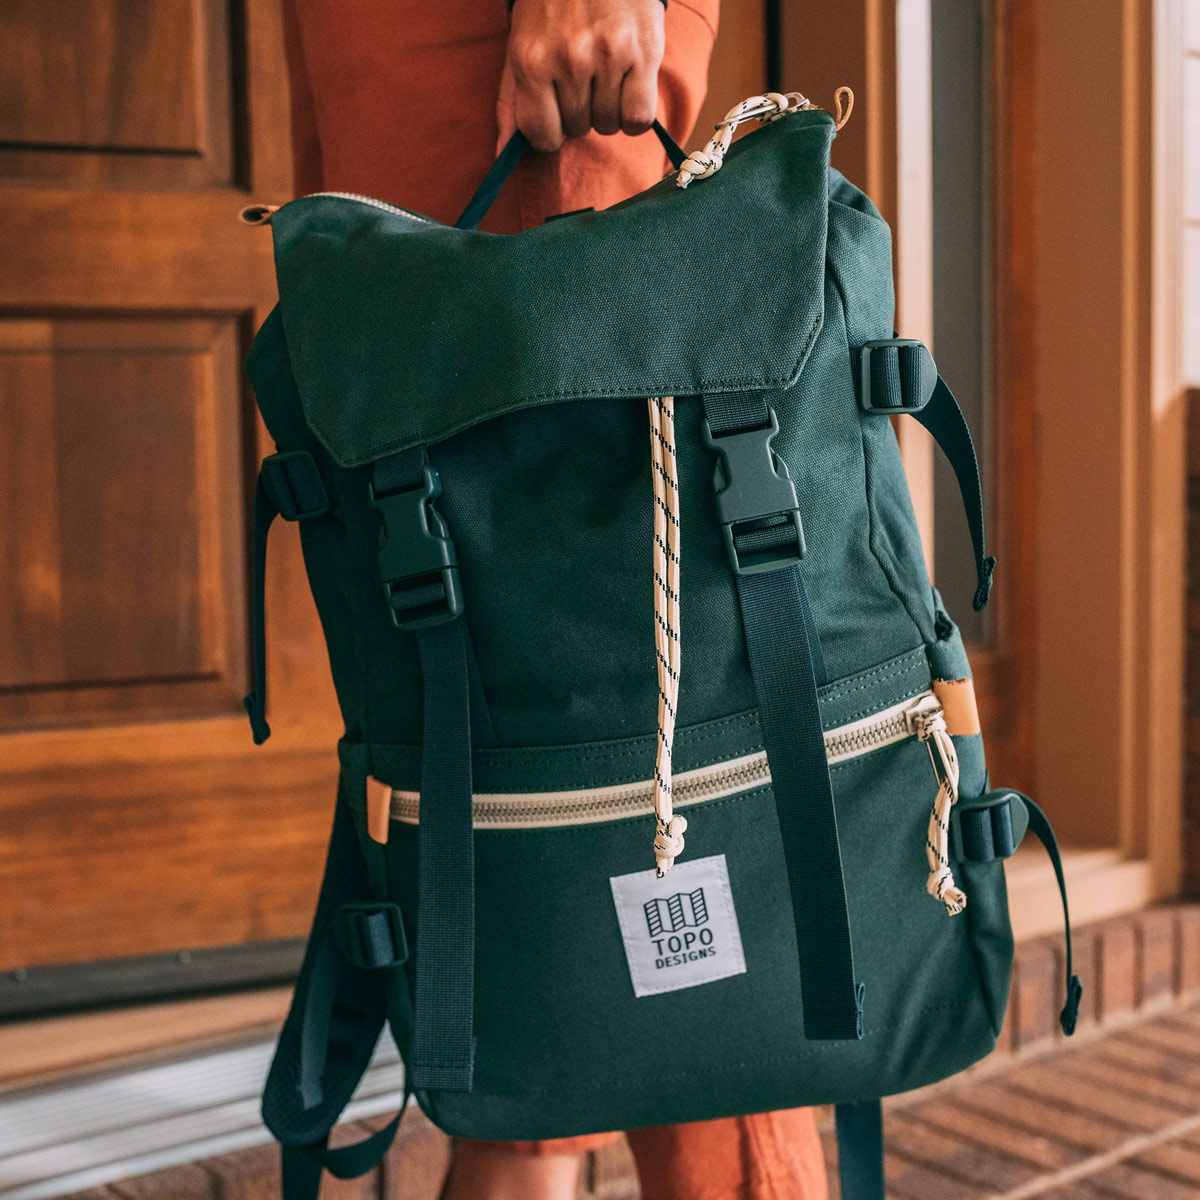 Topo Designs Rover Pack Canvas Forest, Mountain-inspired durability meets city-ready styling in the Rover Pack Canvas